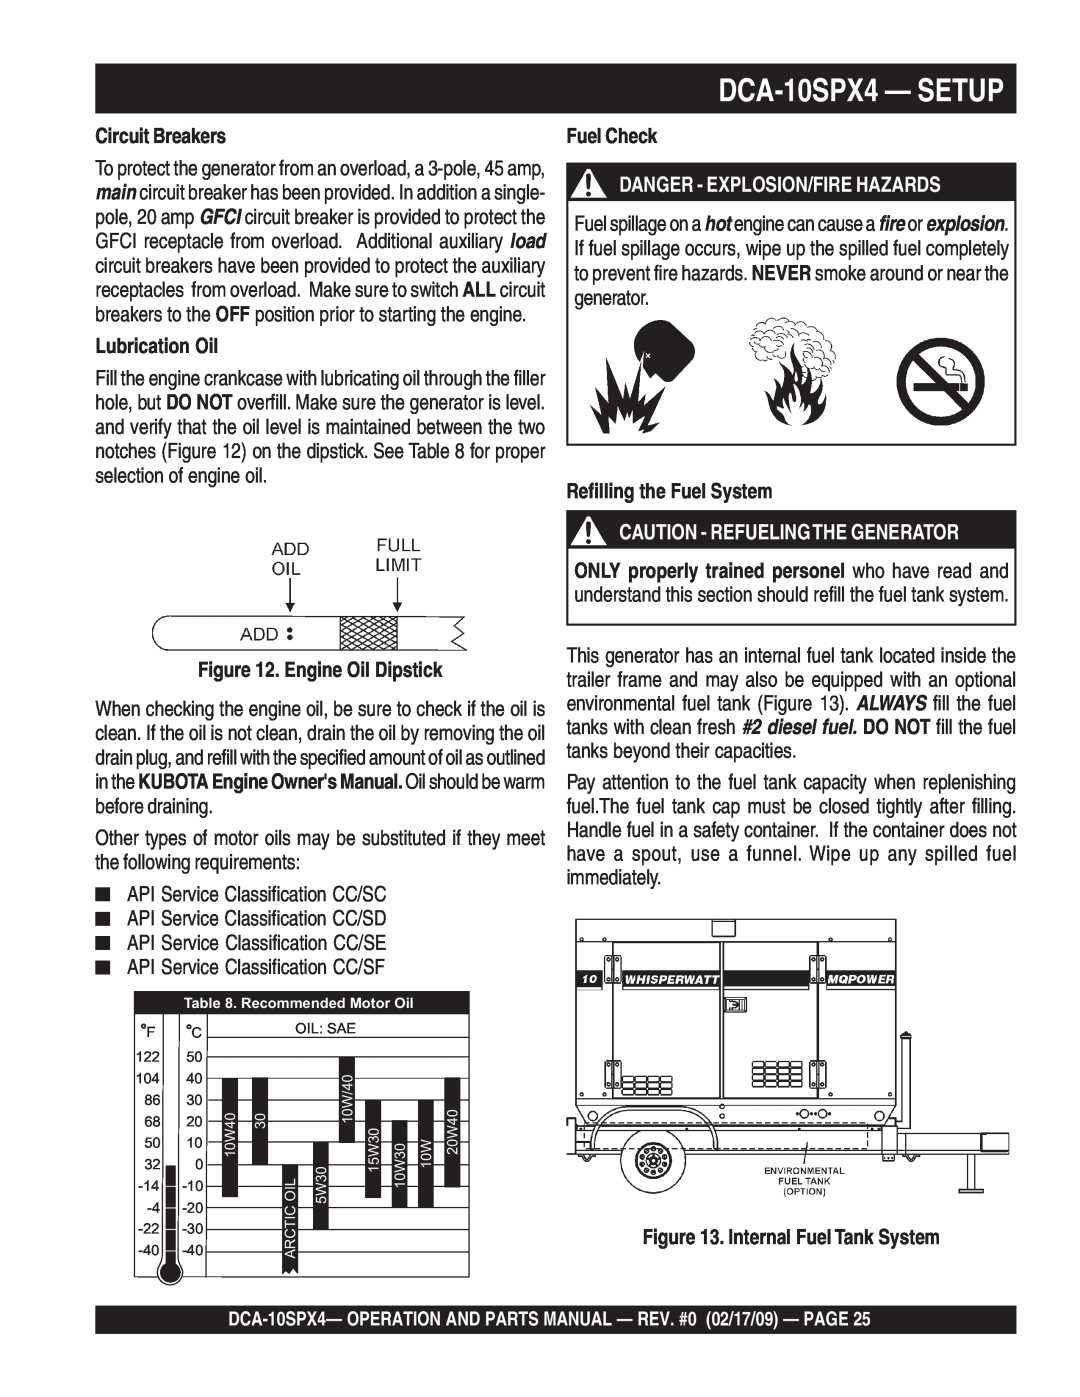 Multiquip operation manual DCA-10SPX4 - SETUP, Circuit Breakers, Lubrication Oil, Engine Oil Dipstick, Fuel Check 